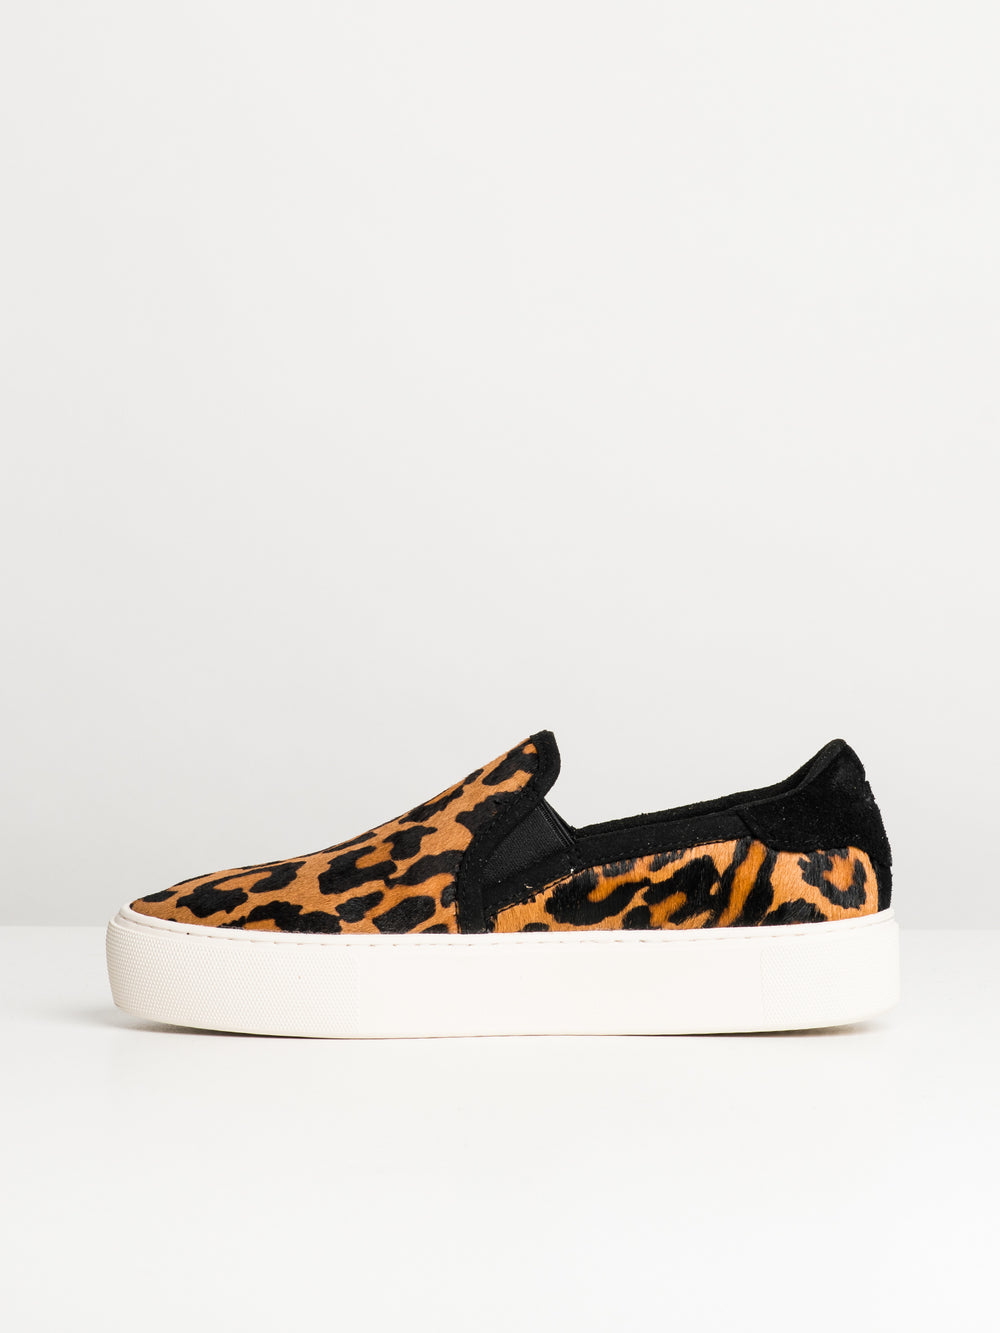 WOMENS UGG CAHLVAN PANTHER PRINT SNEAKER - CLEARANCE